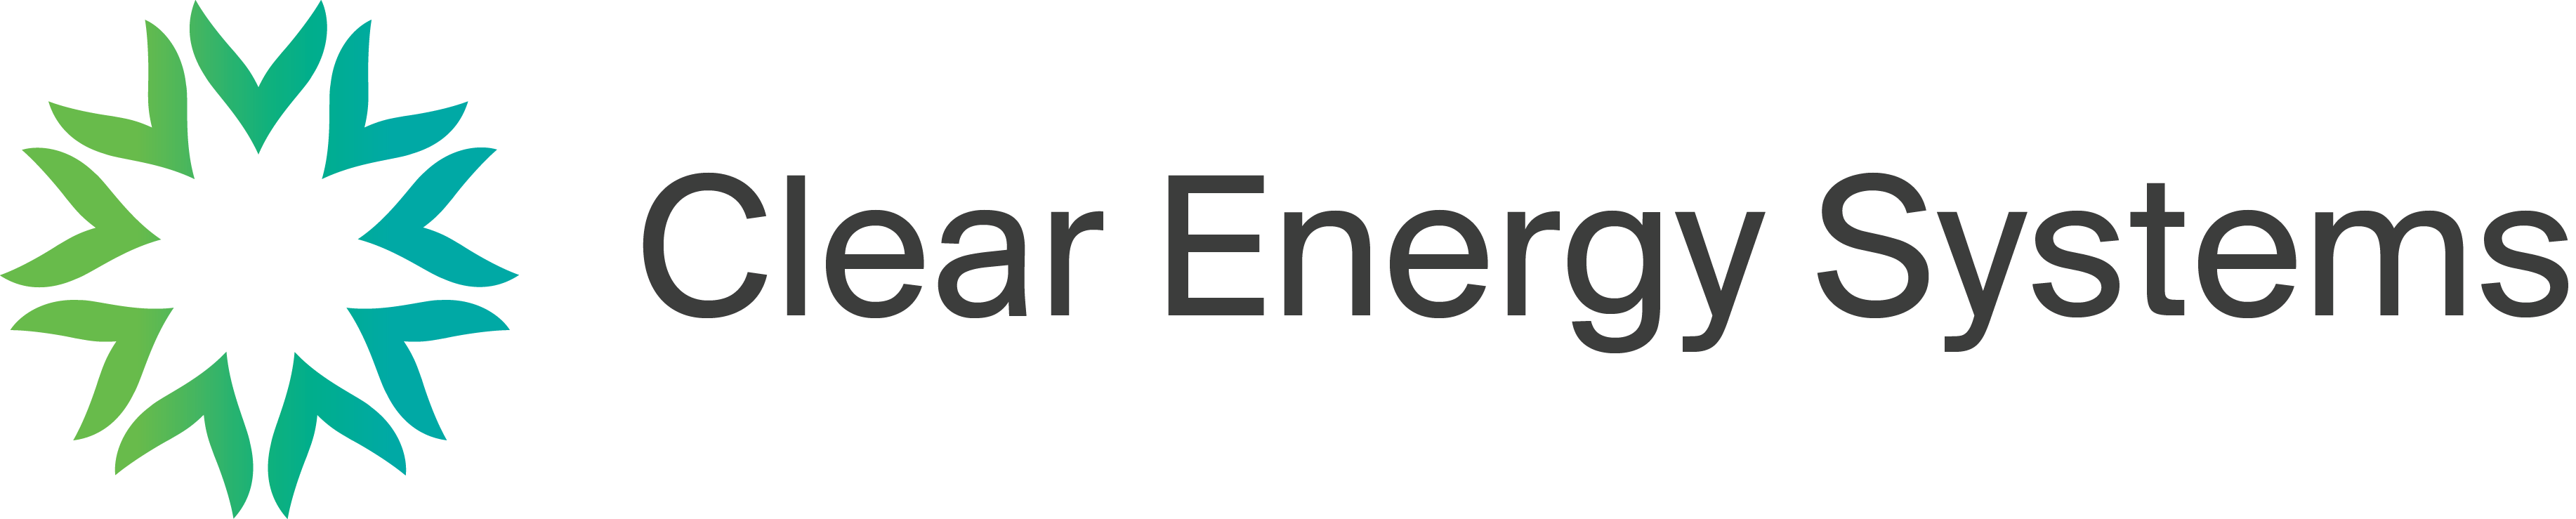 Clear Energy Systems